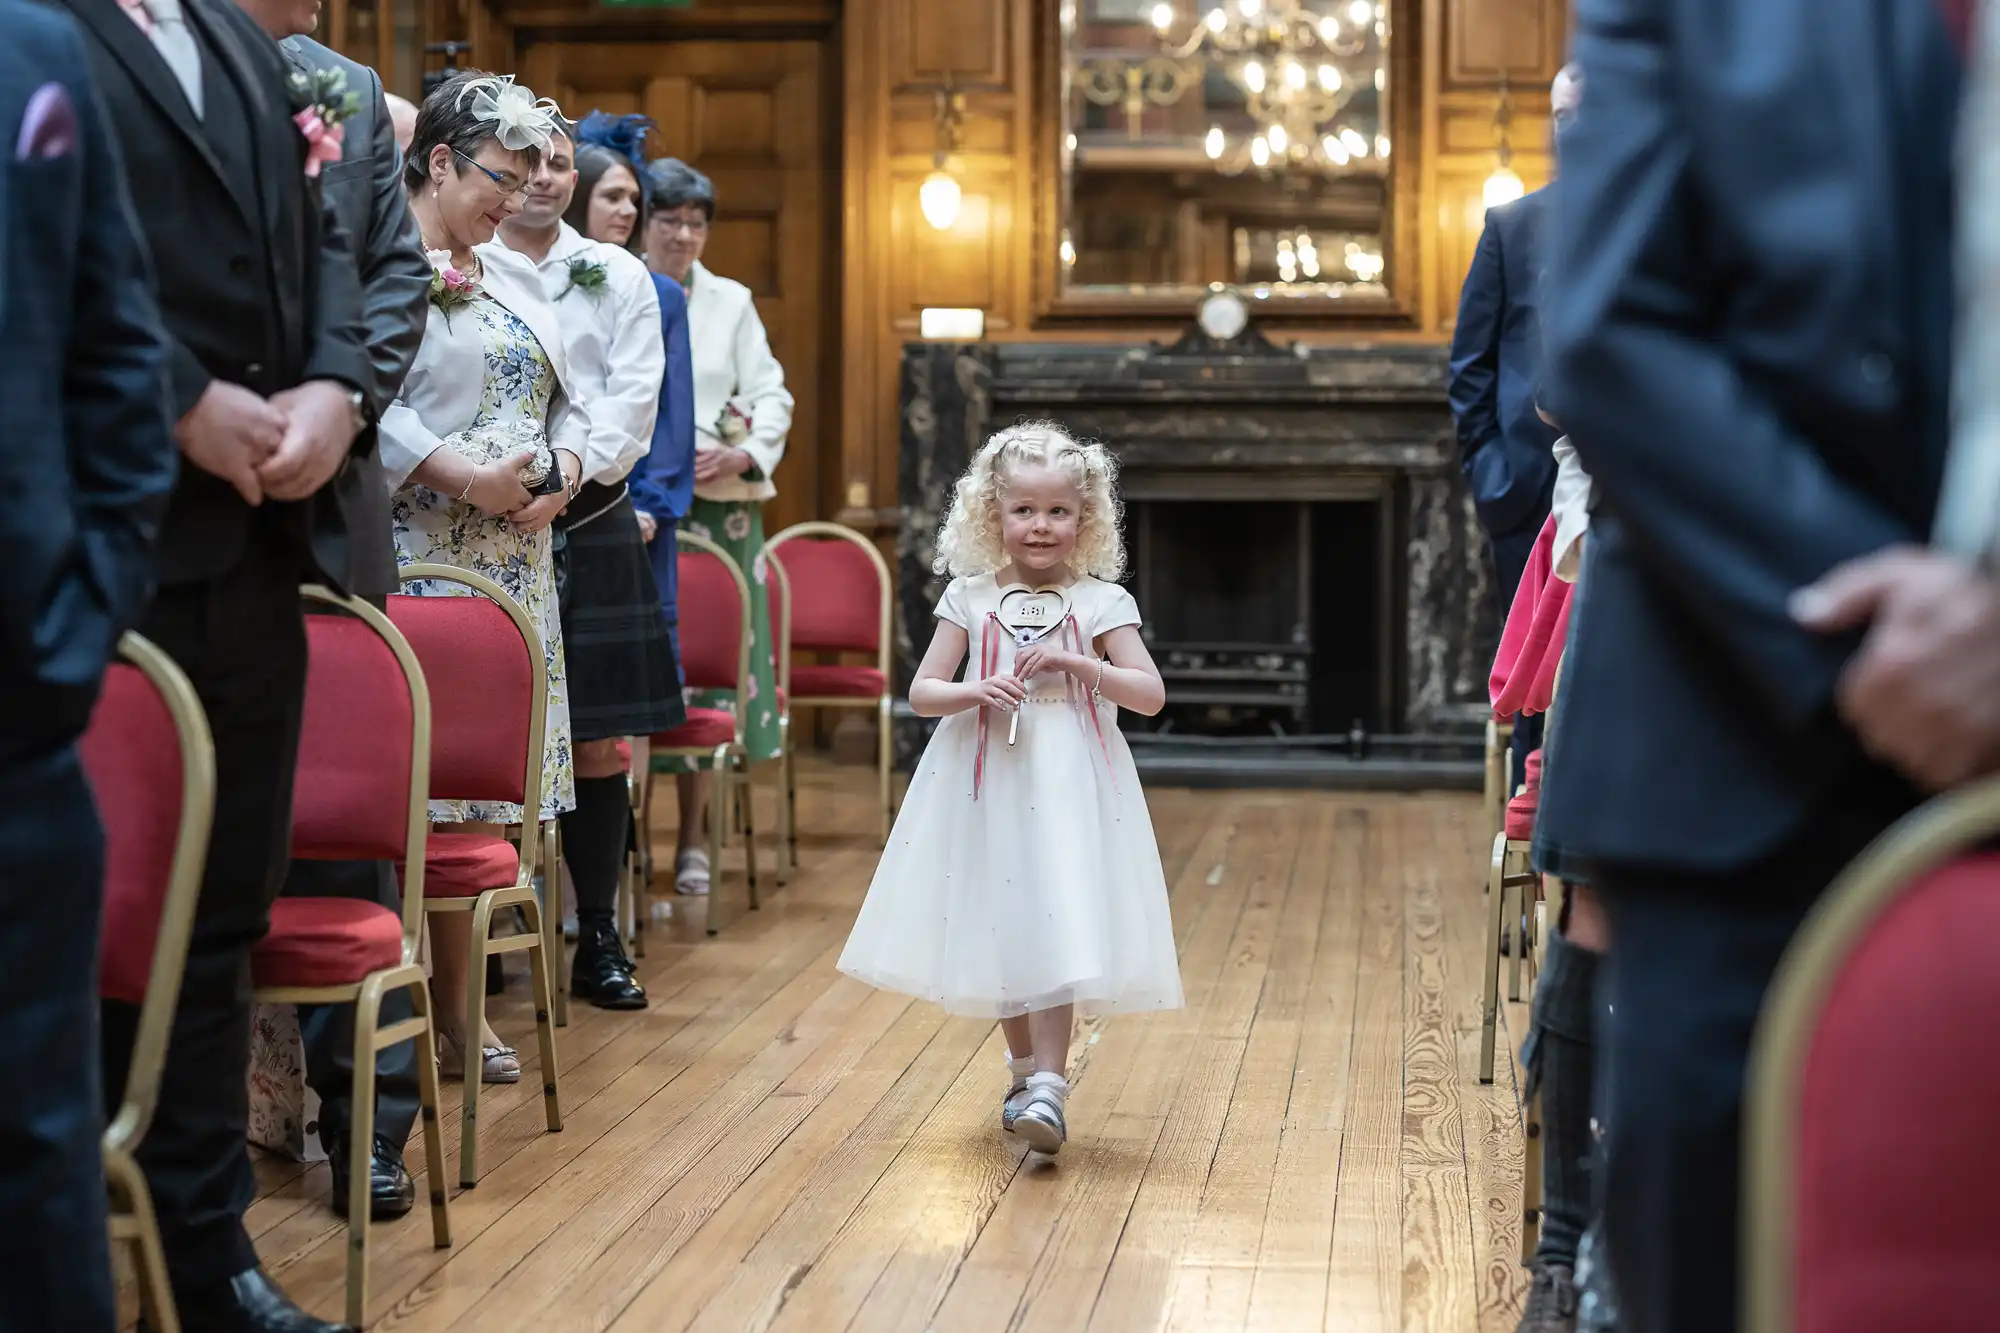 A young girl in a white dress walks down an aisle holding a sign at a wedding ceremony, with seated guests watching.